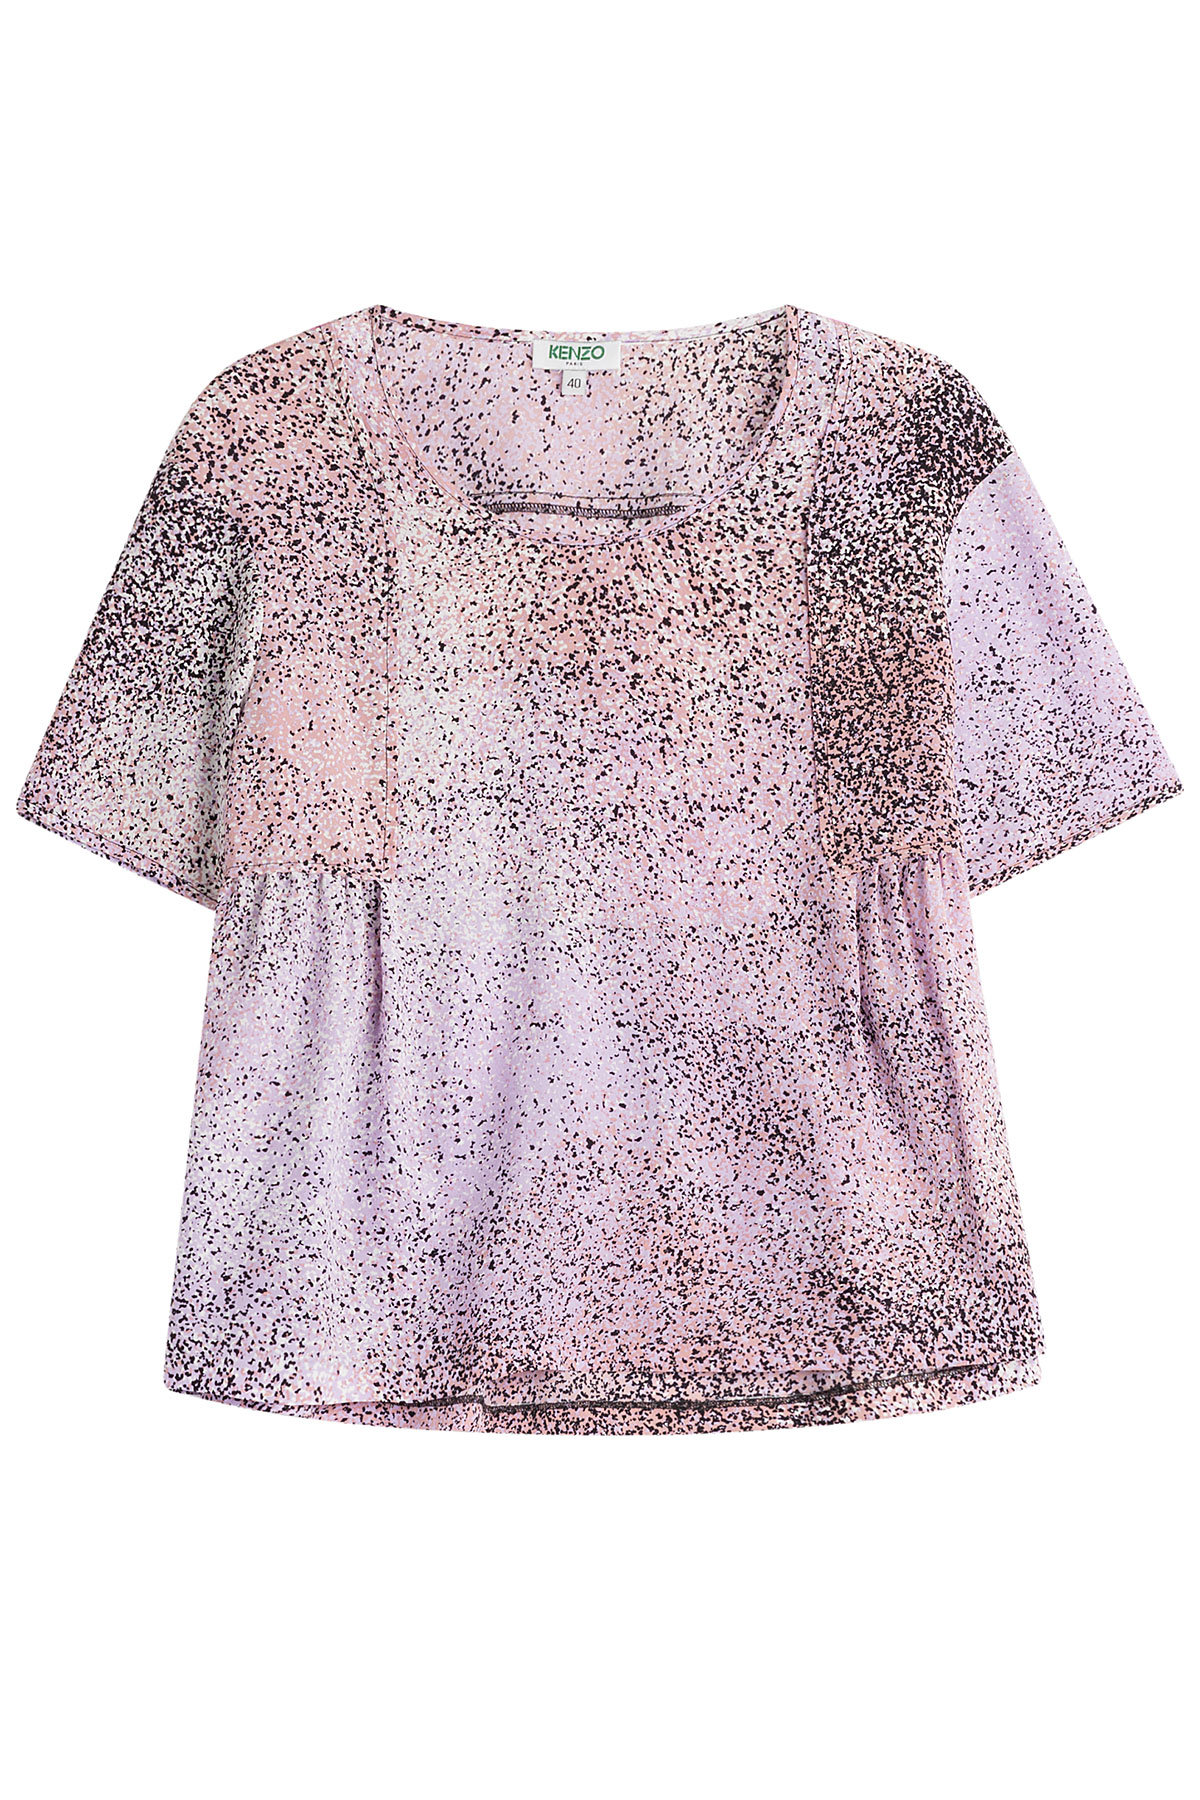 Silk Graphic Print Top by Kenzo